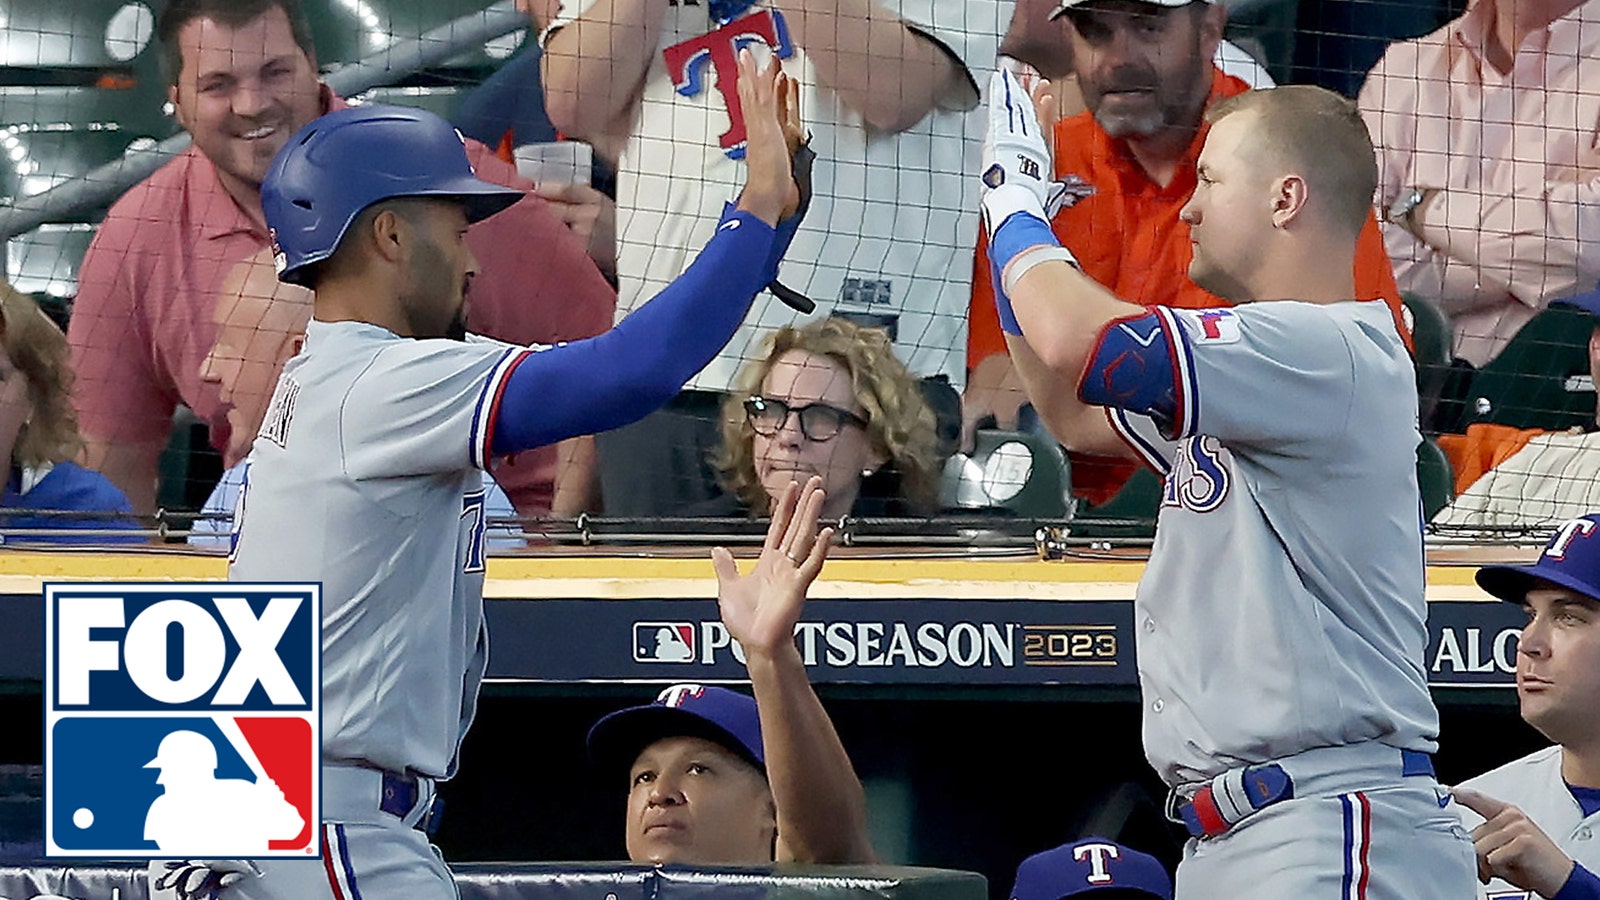 Rangers' Adolis García, Mitch Garver and Nathaniel Lowe all smack RBI base hits to scores FOUR runs against Astros in first inning